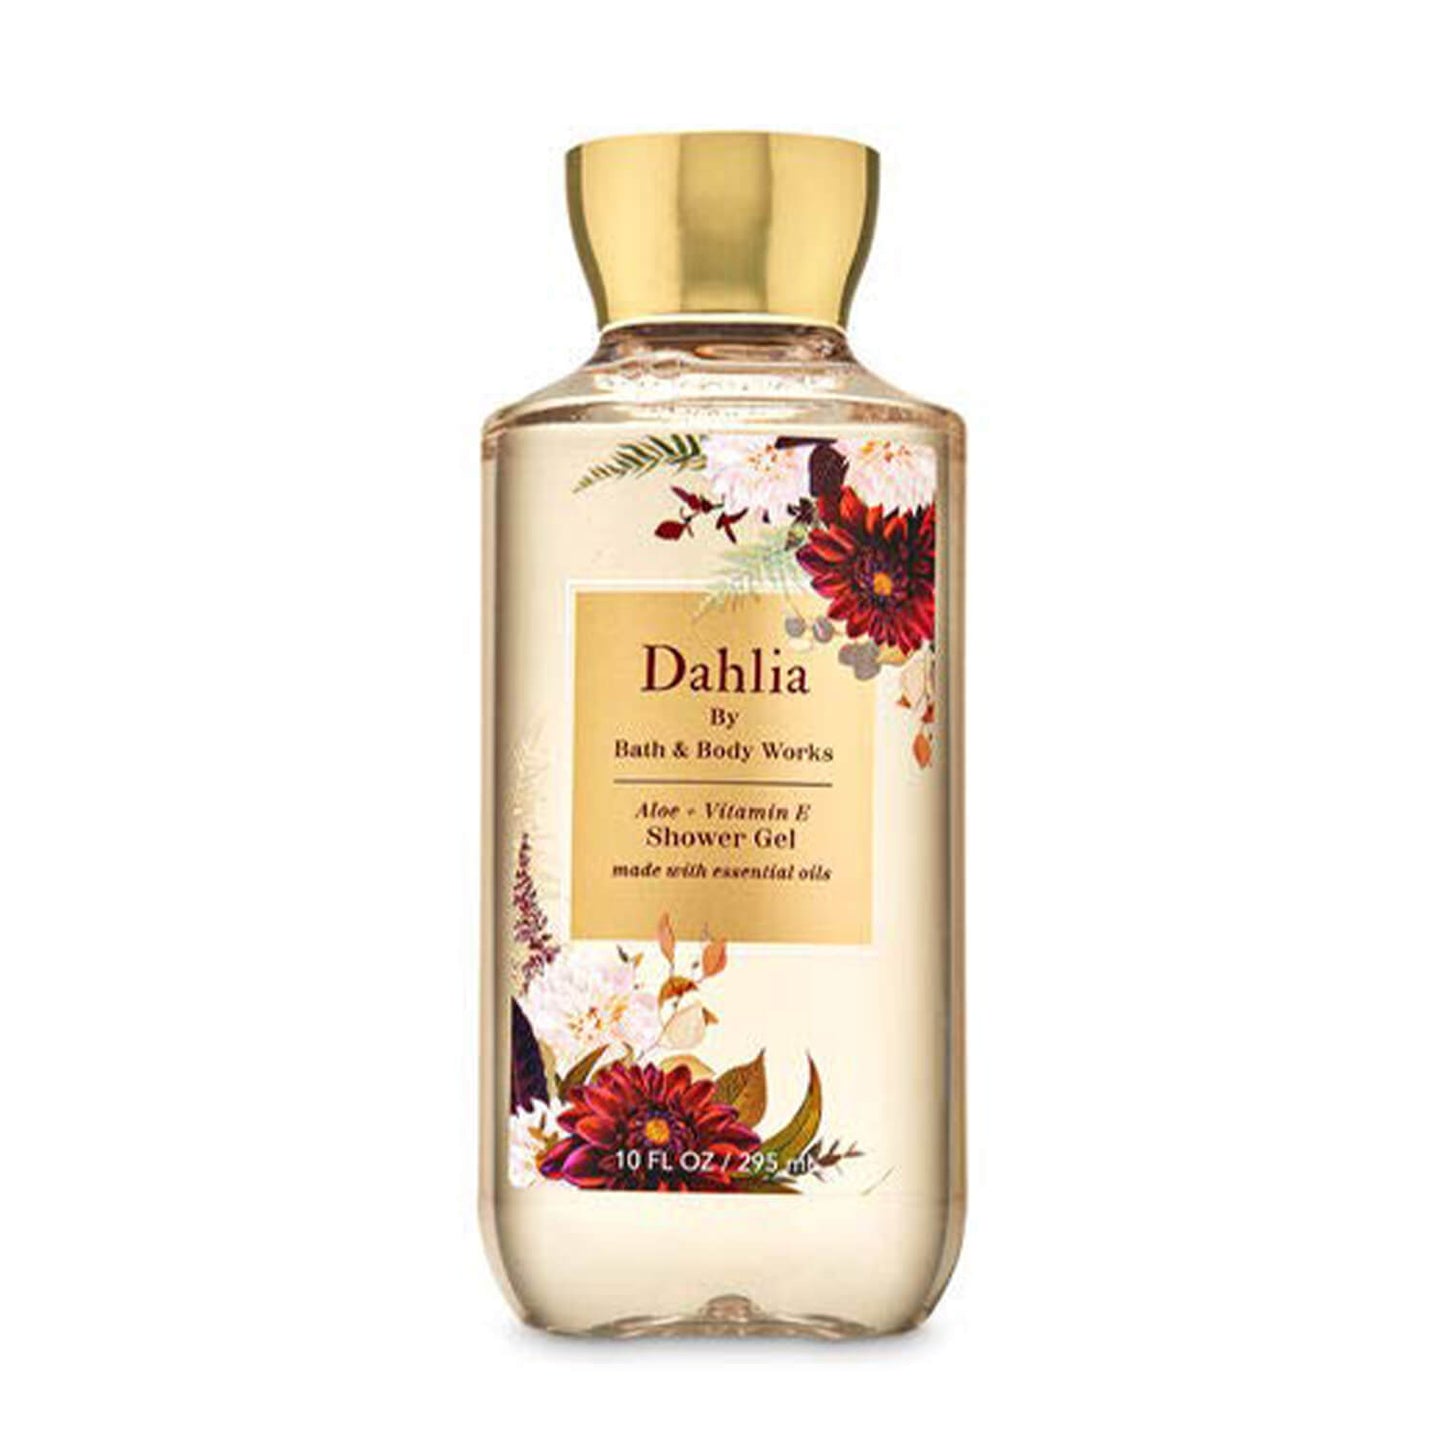 Buy Bath & Body Works shower gel in Dahlia fragrance available at heygirl.pk for cash on delivery in Karachi, Lahore, Islamabad, Rawalpindi across Pakistan.